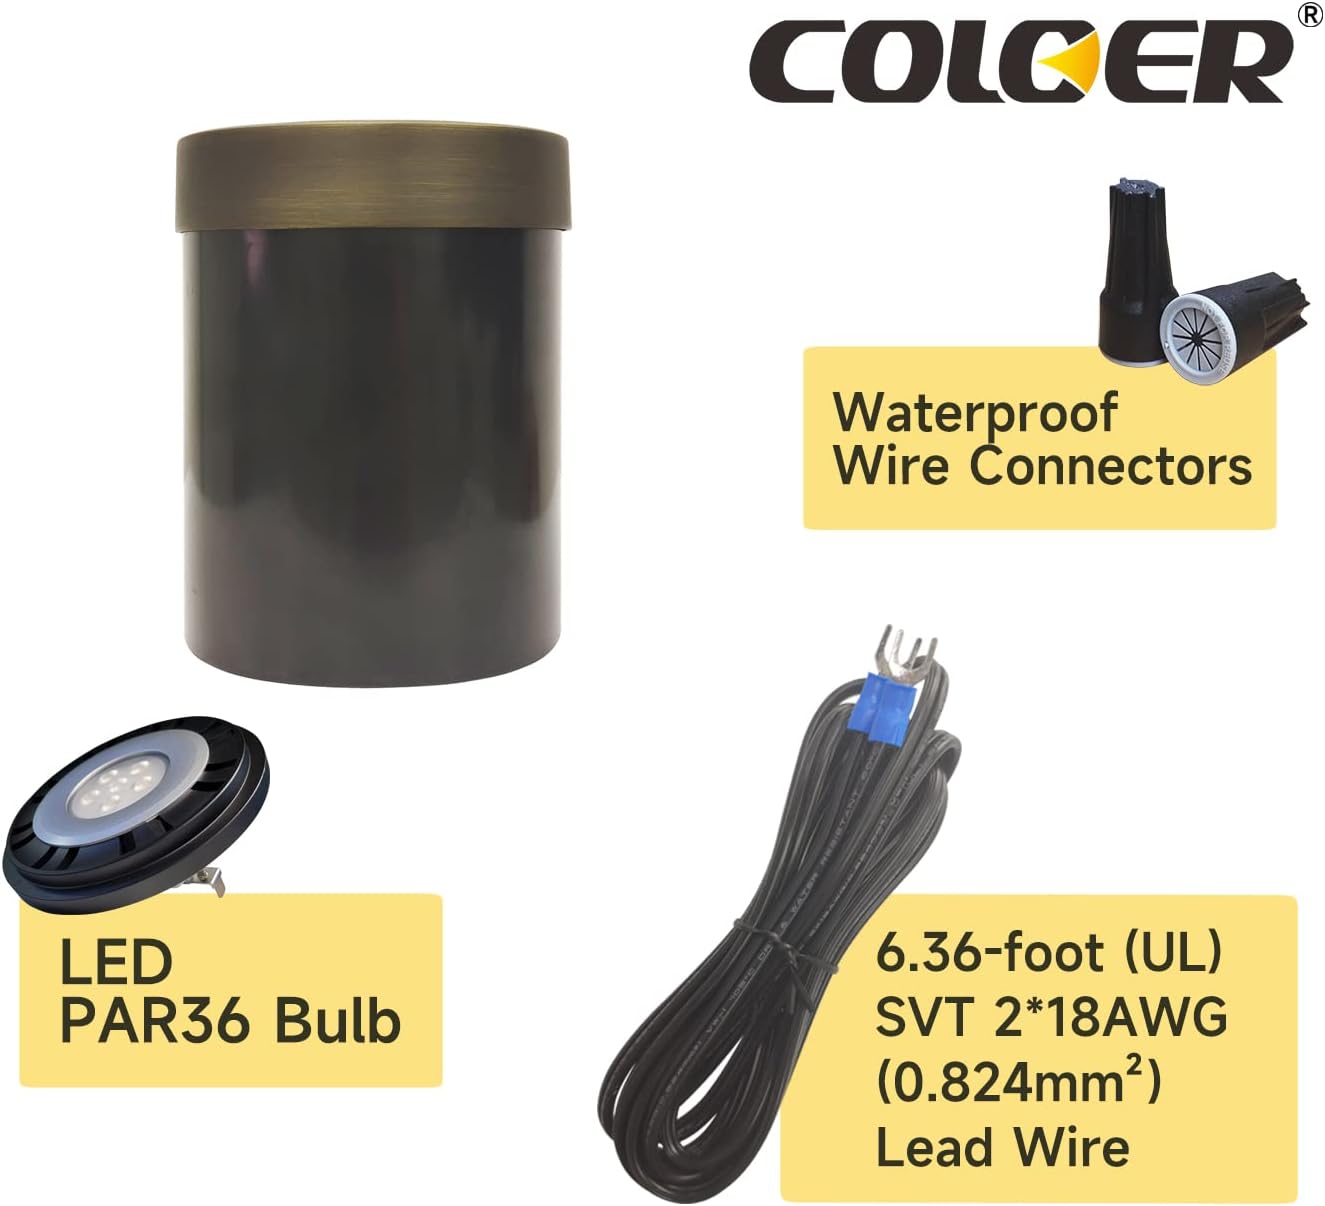 LED outdoor low voltage pathway well light kit with PAR36 bulb, waterproof wire connectors, and 6.36-foot lead wire.